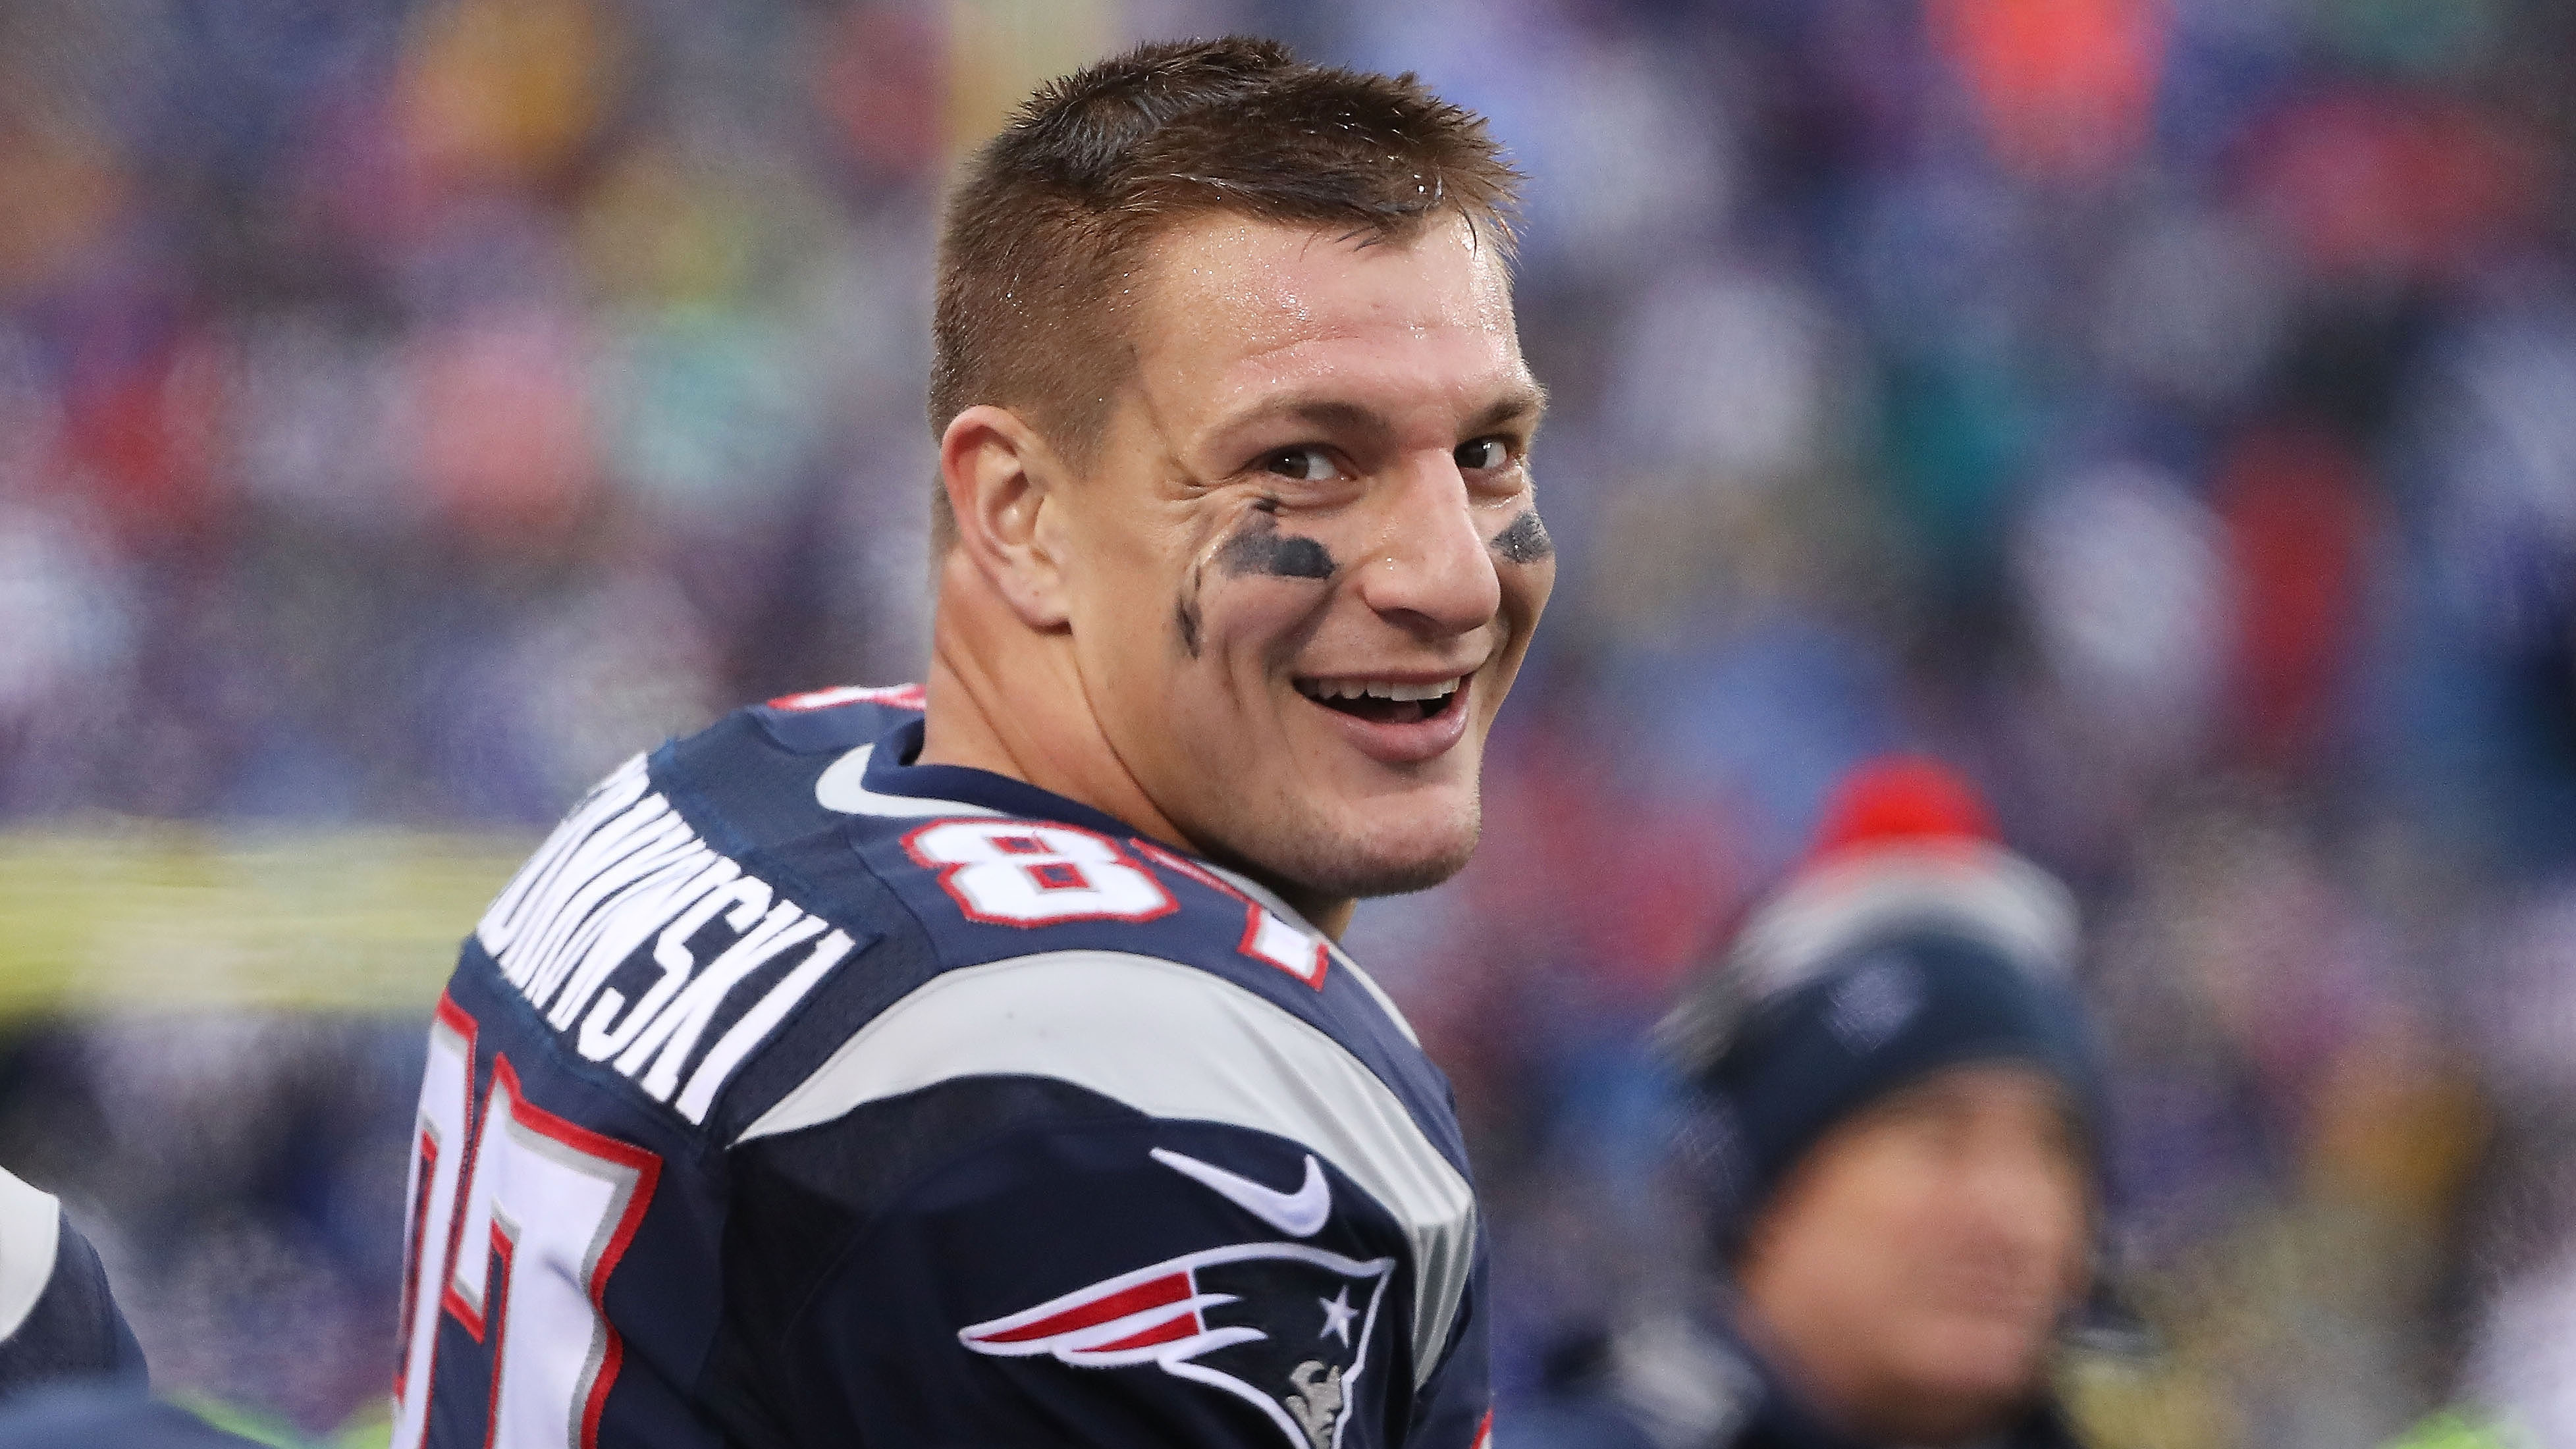 Rob Gronkowski Ranks 15th On NFL’s Top 100 List, Making It A Pretty Silly List ...